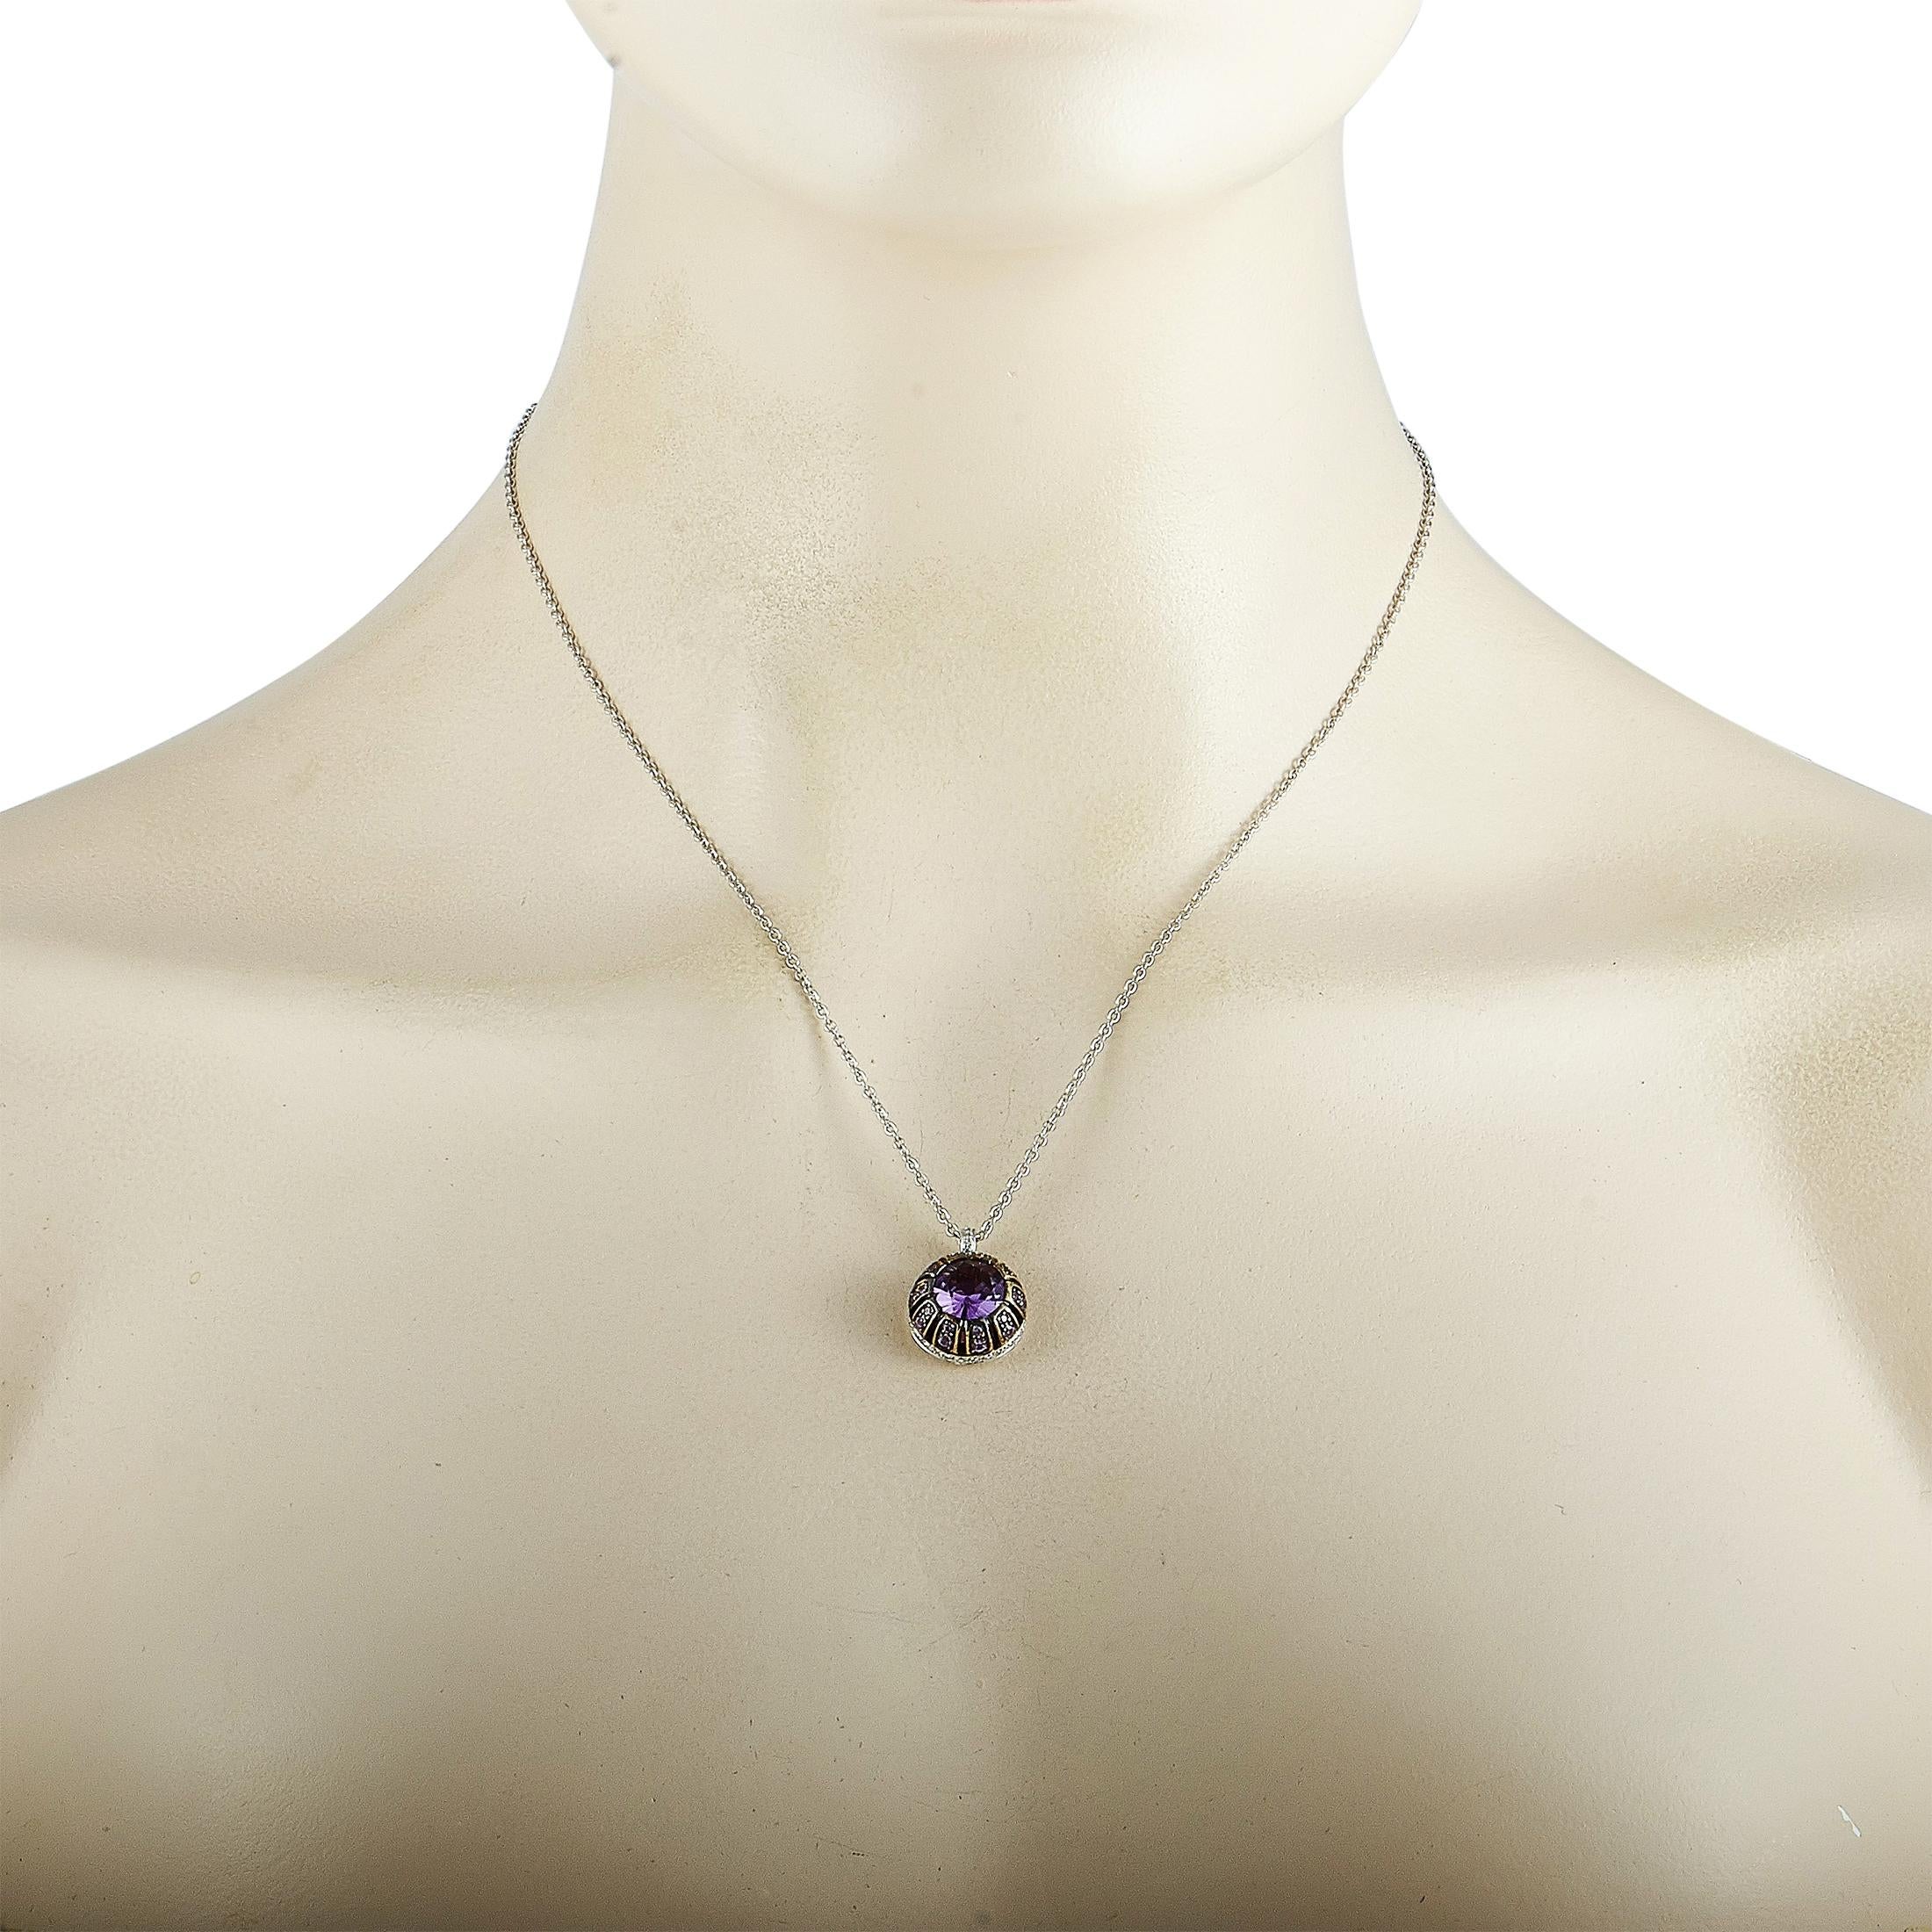 This Oro Trend necklace is crafted from 18K white gold and set with an amethyst, a total of 0.23 carats of diamonds, and 0.48 carats of purple sapphires. The necklace weighs 8.9 grams and is presented with a 16” chain, boasting a pendant that